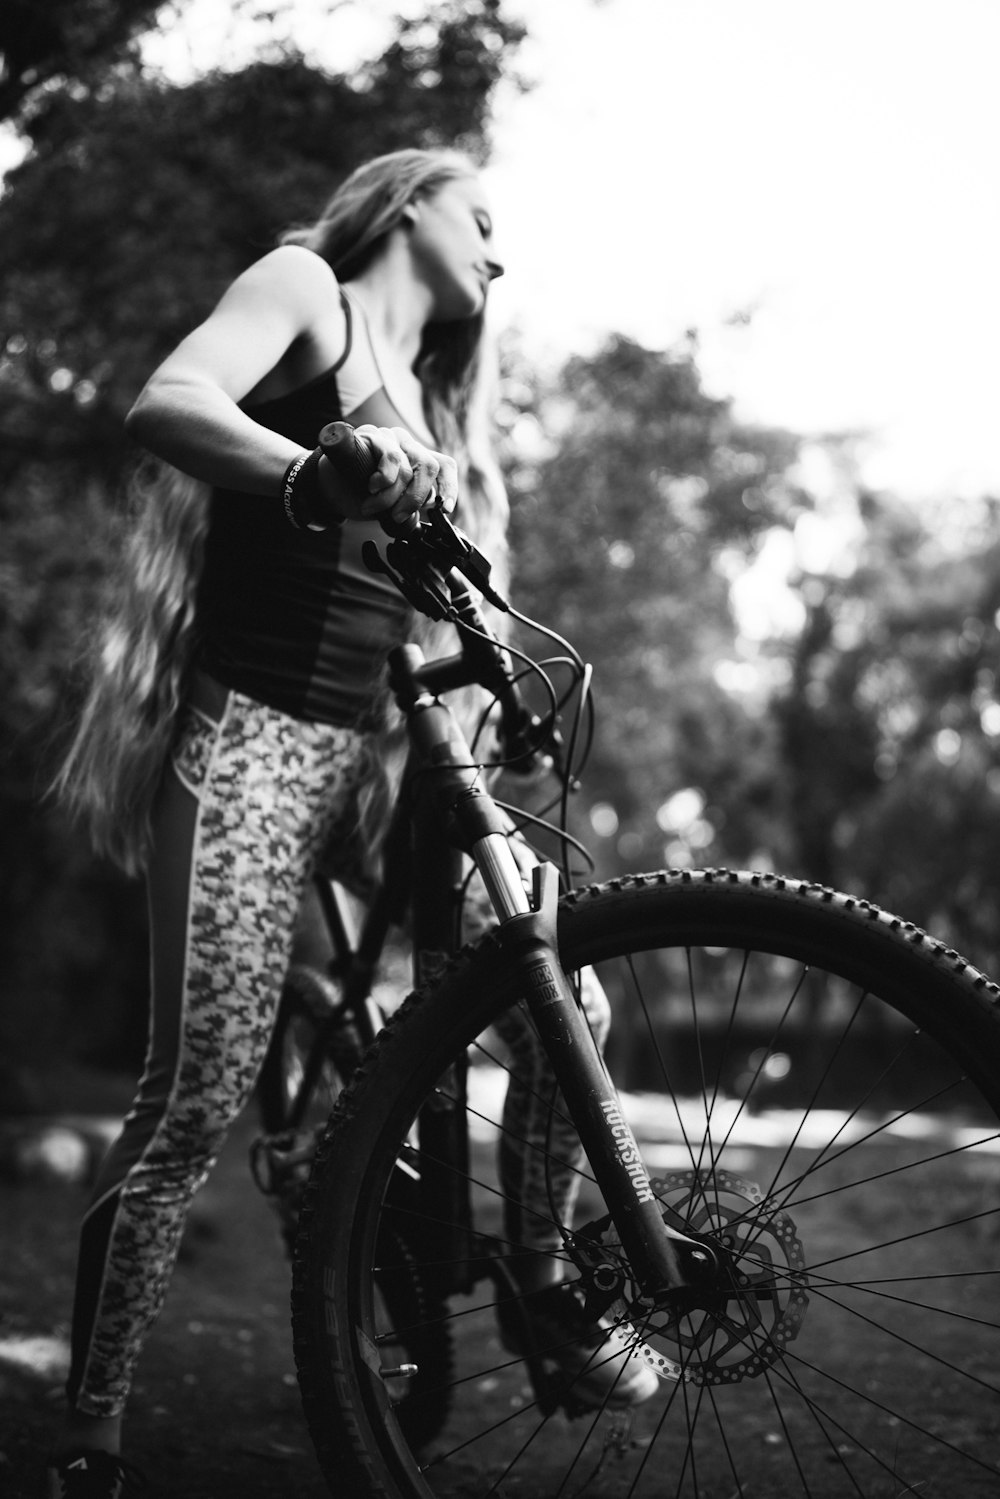 woman riding bicycle near trees